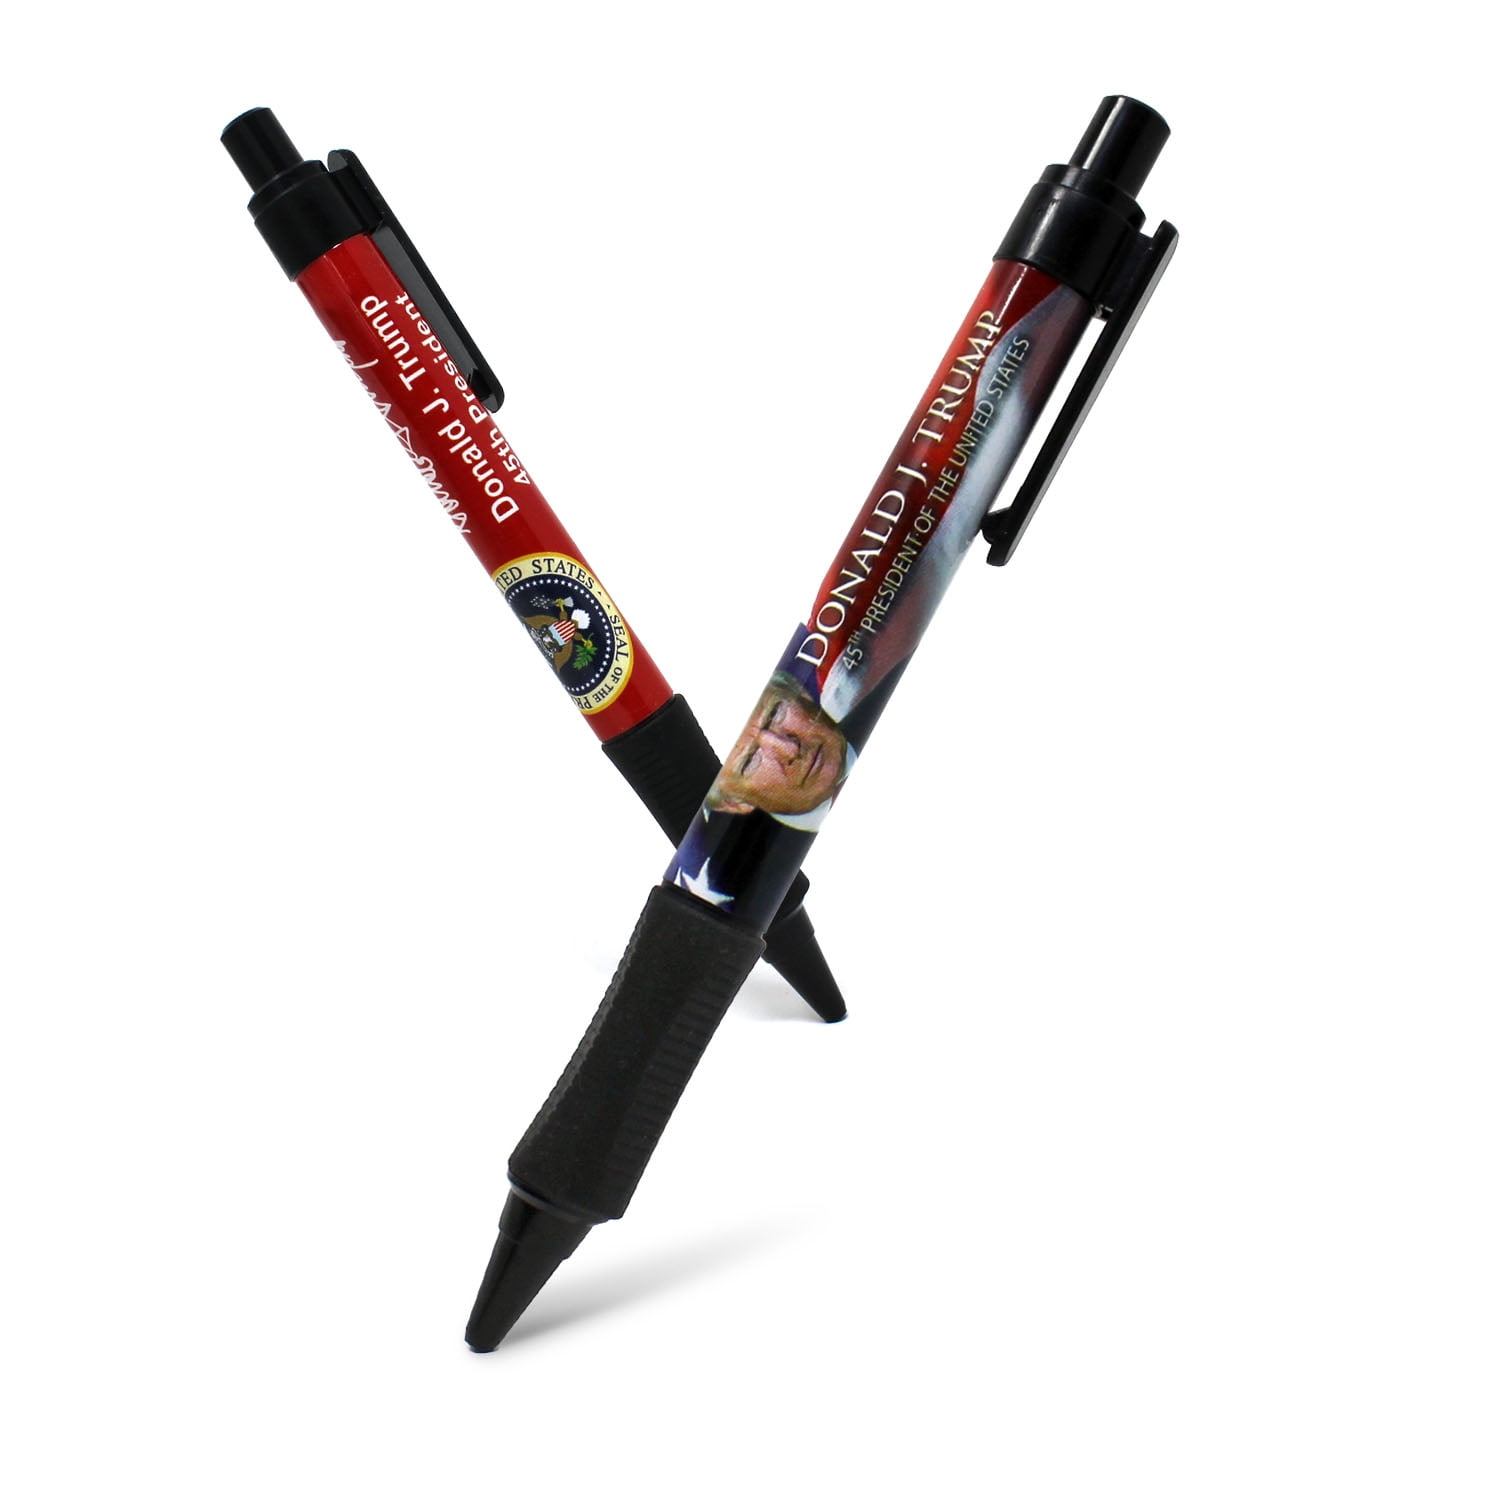 President Donald Trump Ball Pen Presidential Election Campaign Pens Pack of 4